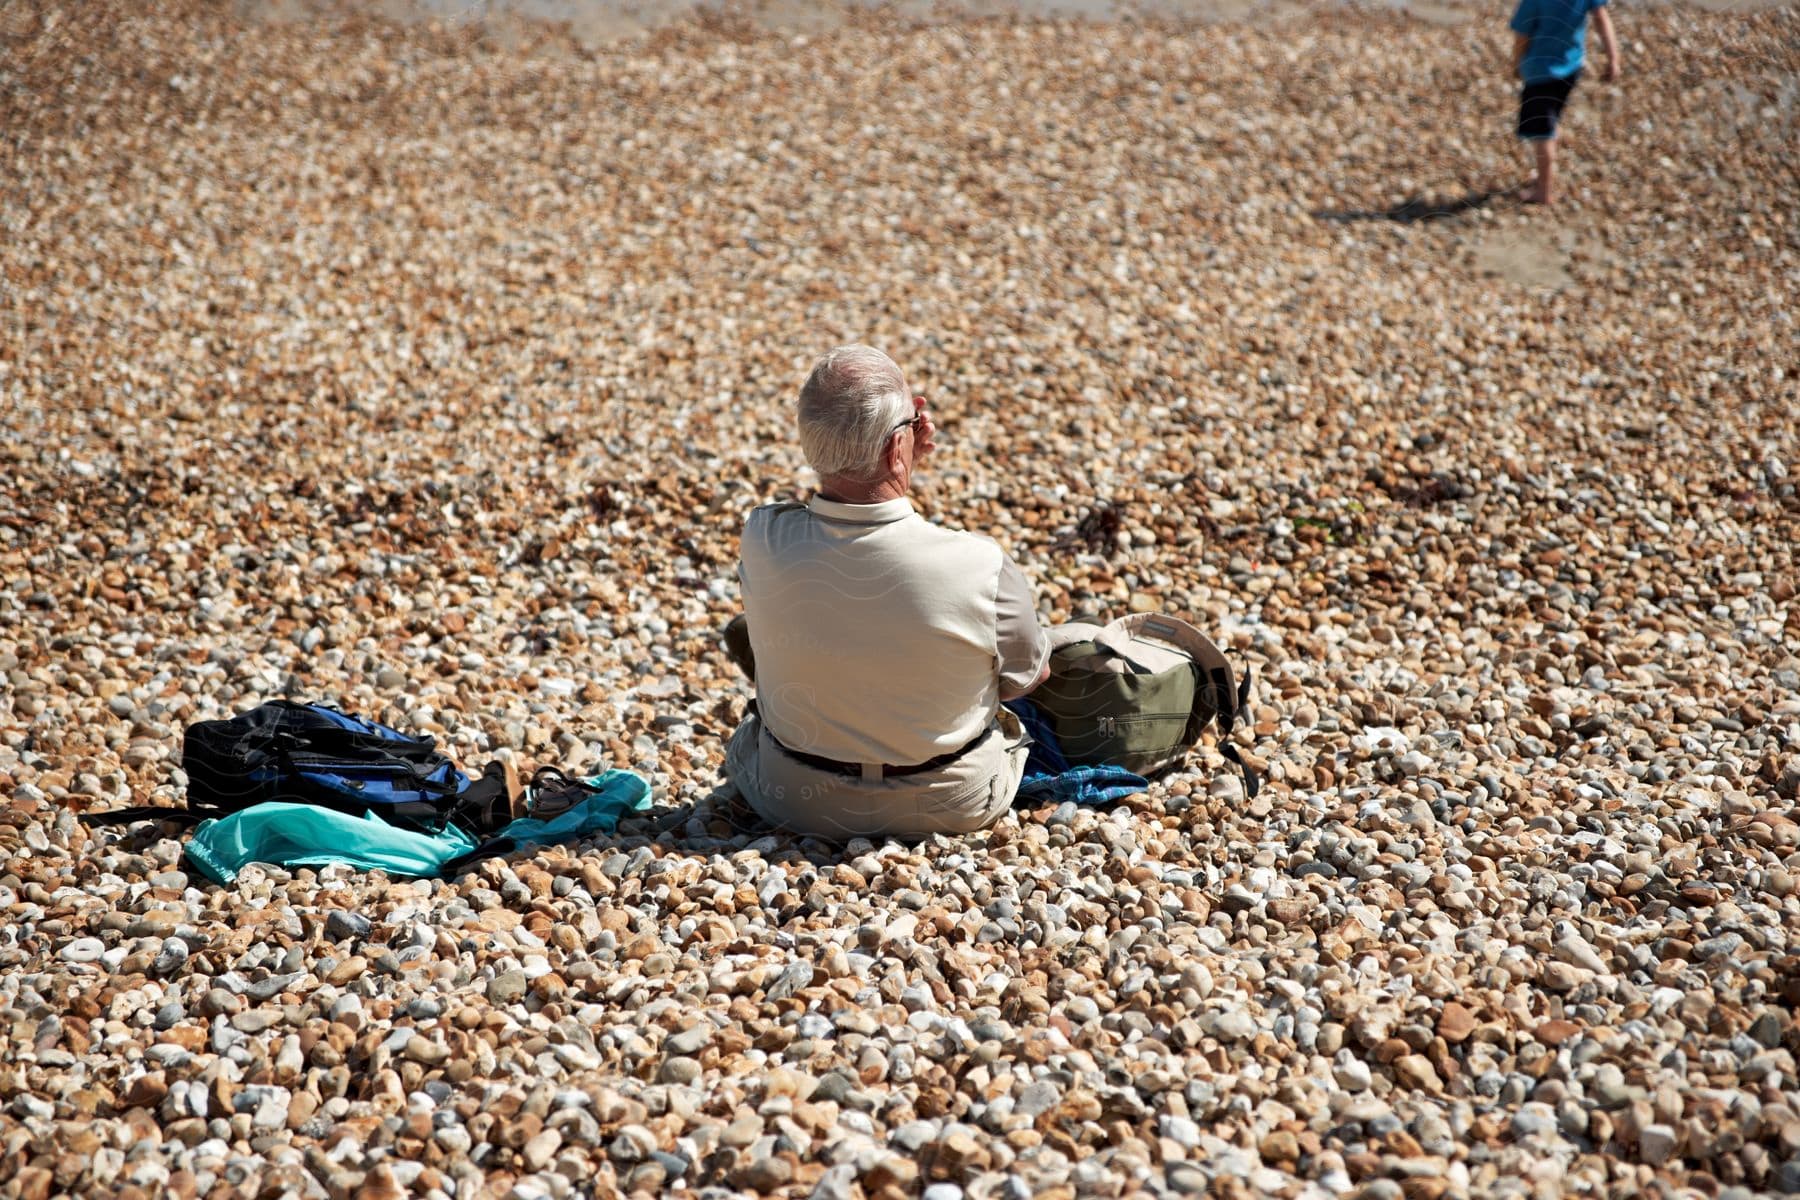 An elderly man relaxes on a rocky shore, his backpack and bag nearby, as a child in blue bursts into view.